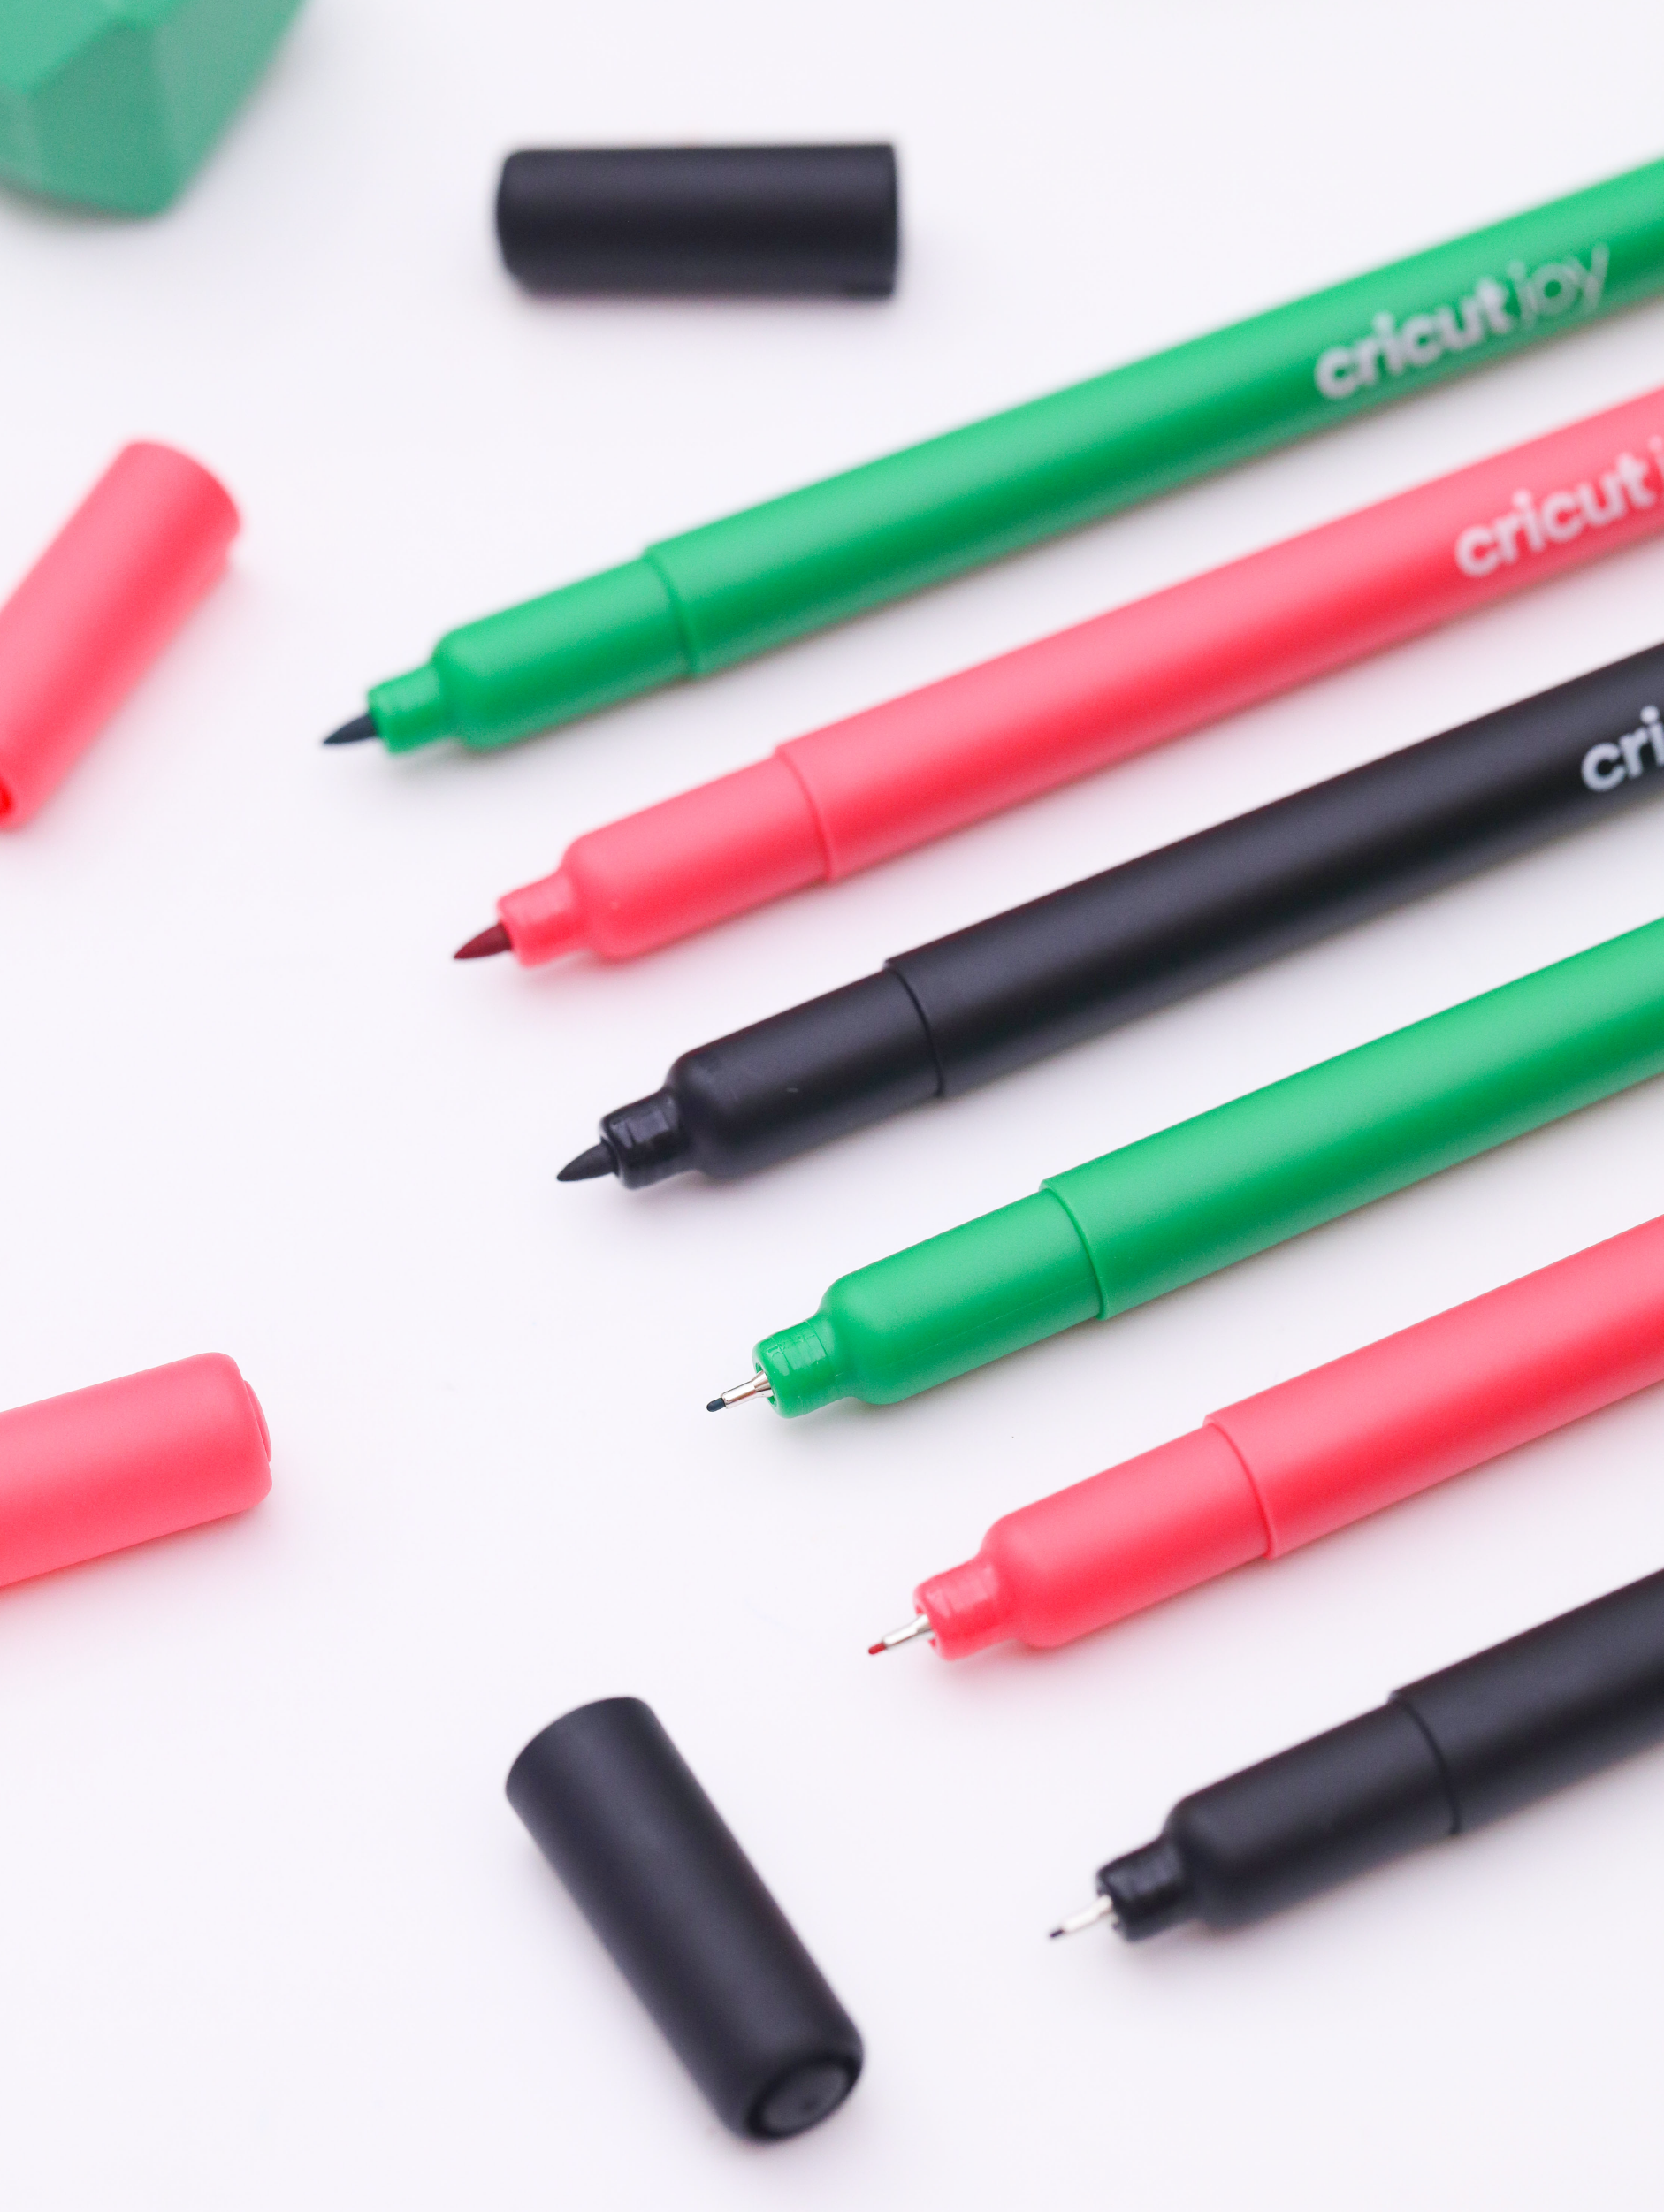 Cricut Joy Infusible Ink Pens 0.4, (3 ct) | Black, Red, Green-Cricut Joy Accessories-GooglyGooeys | Cricut | Arts Craft and DIY Store based in the Philippines